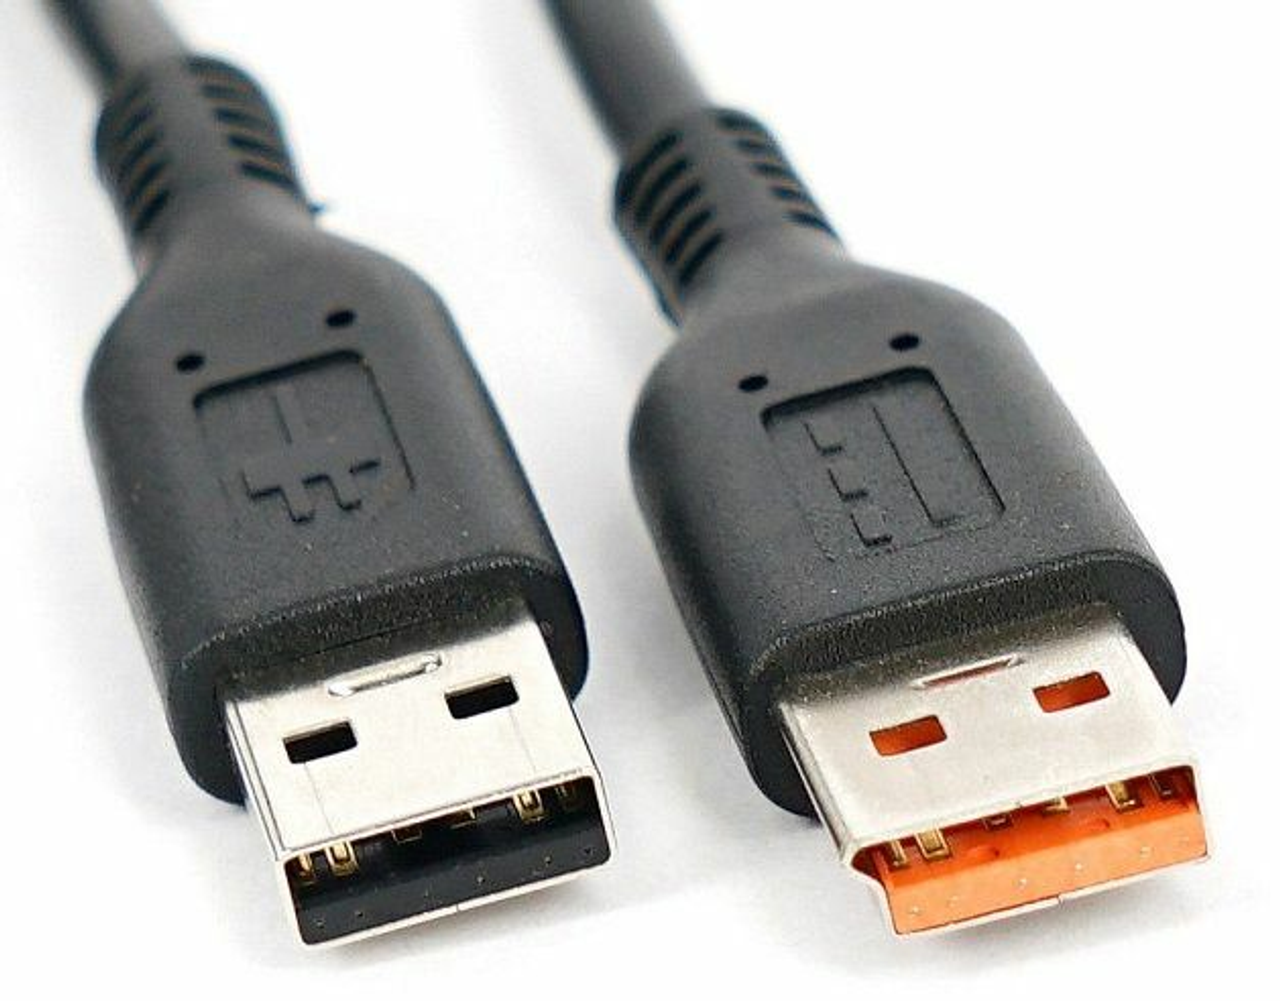 proprietary cable